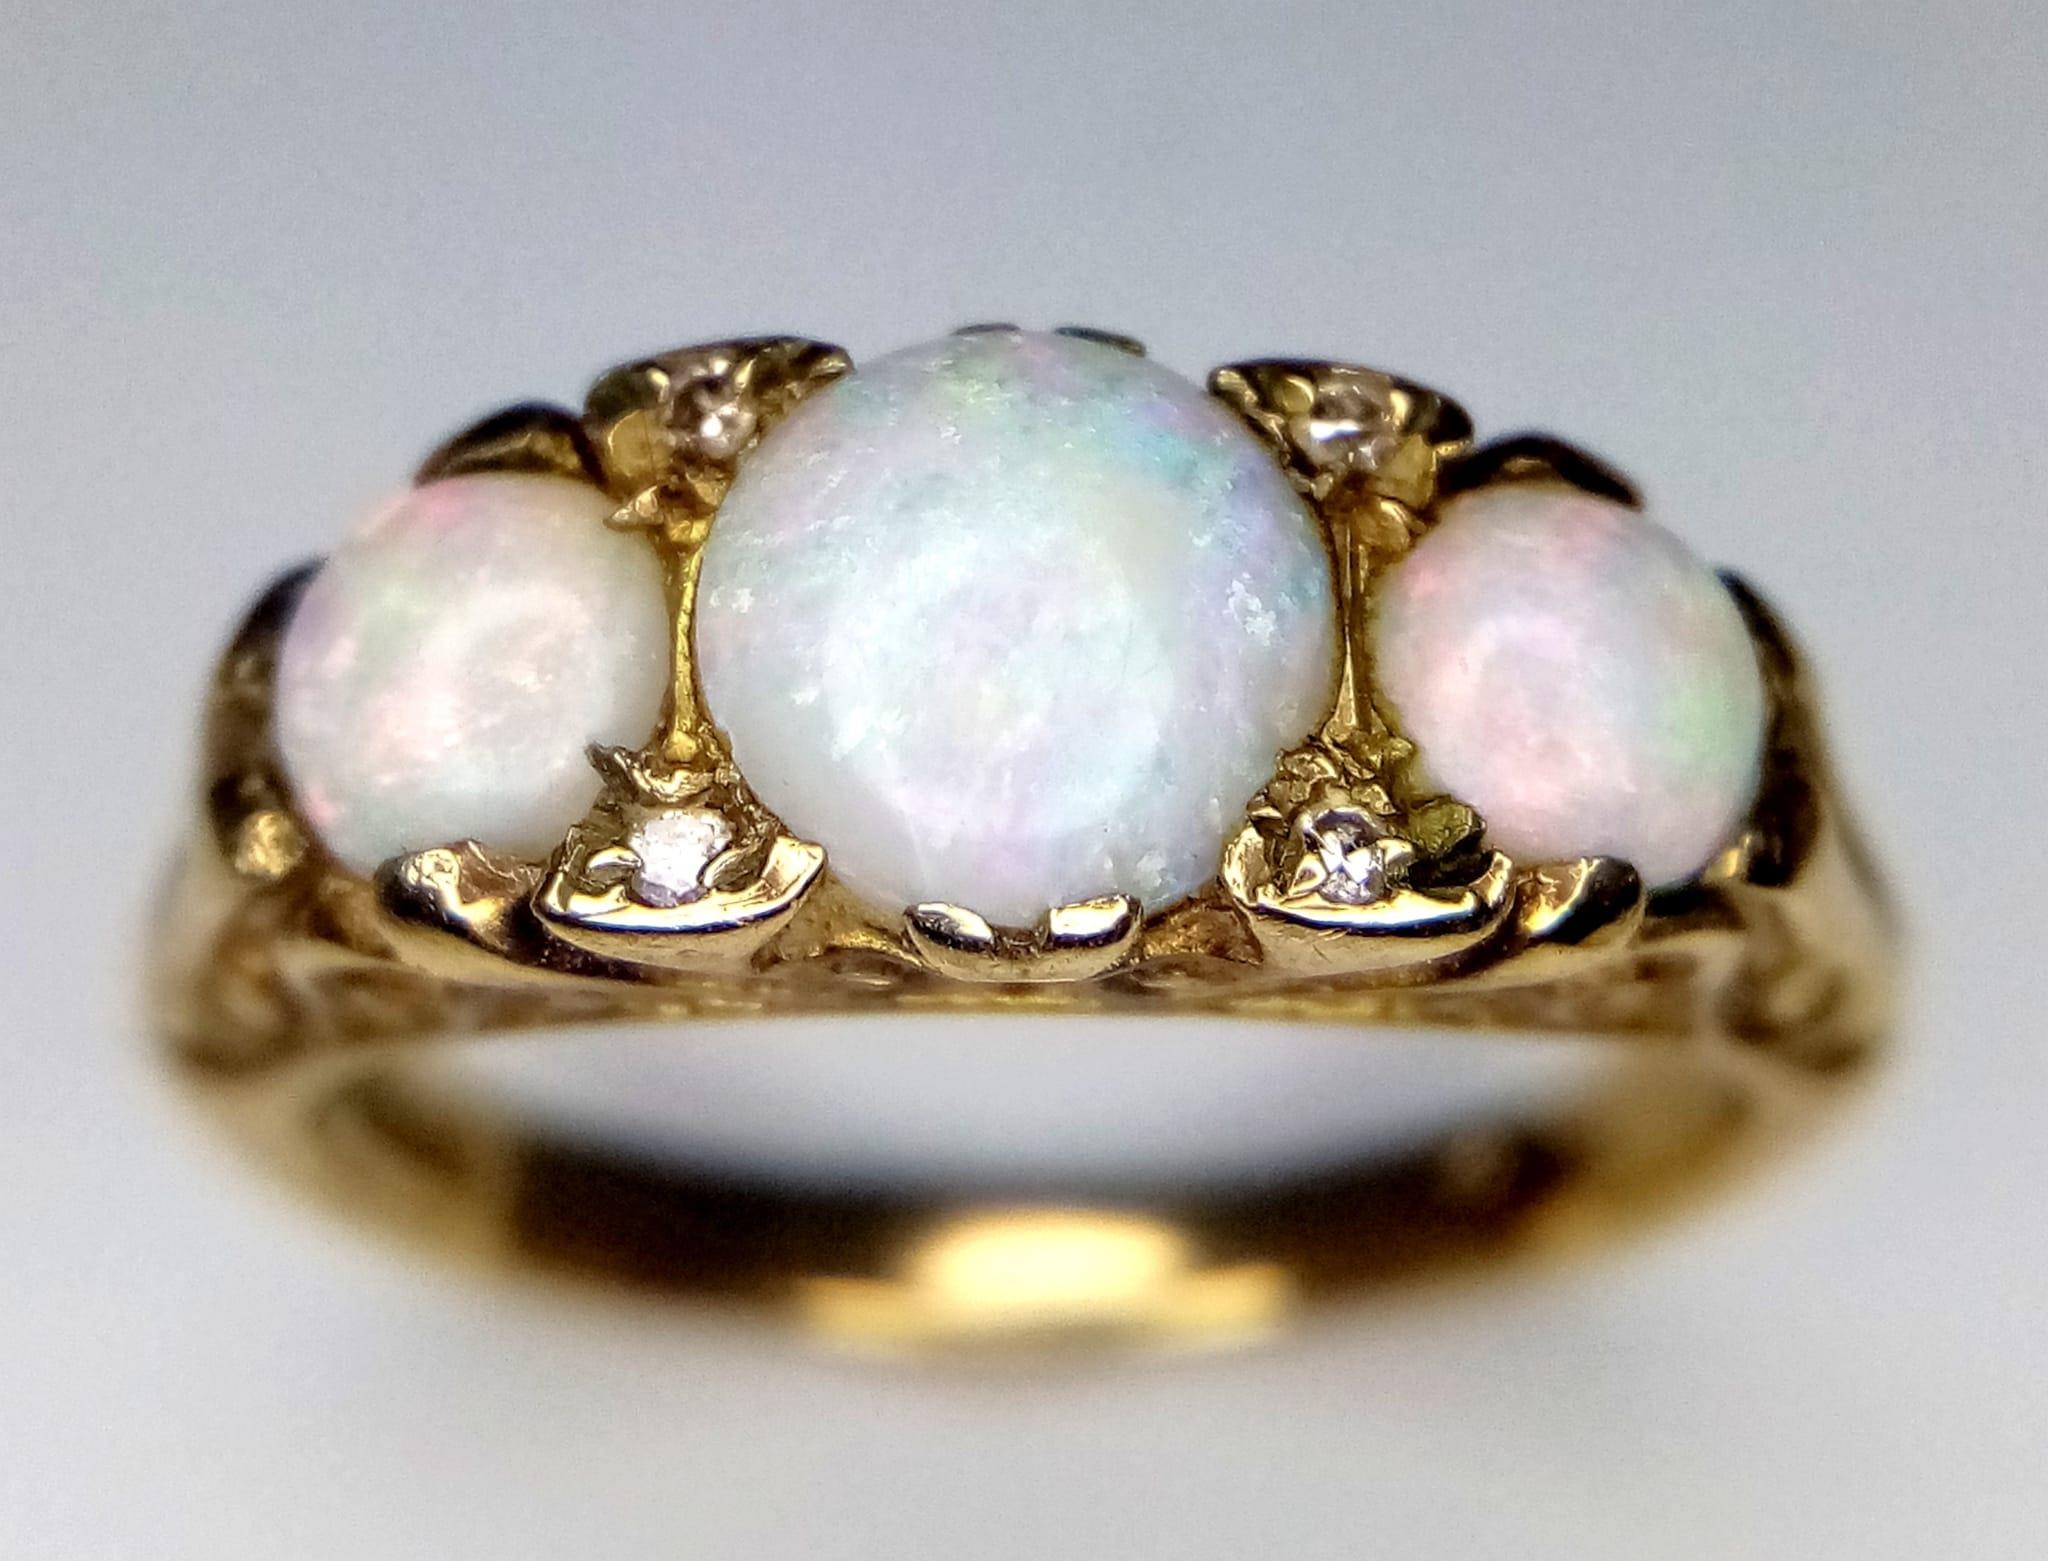 A Wonderful Vintage 9K Yellow Gold and Three Opal Ring. Excellent colour-play. Size I. 3.25g weight. - Image 2 of 4